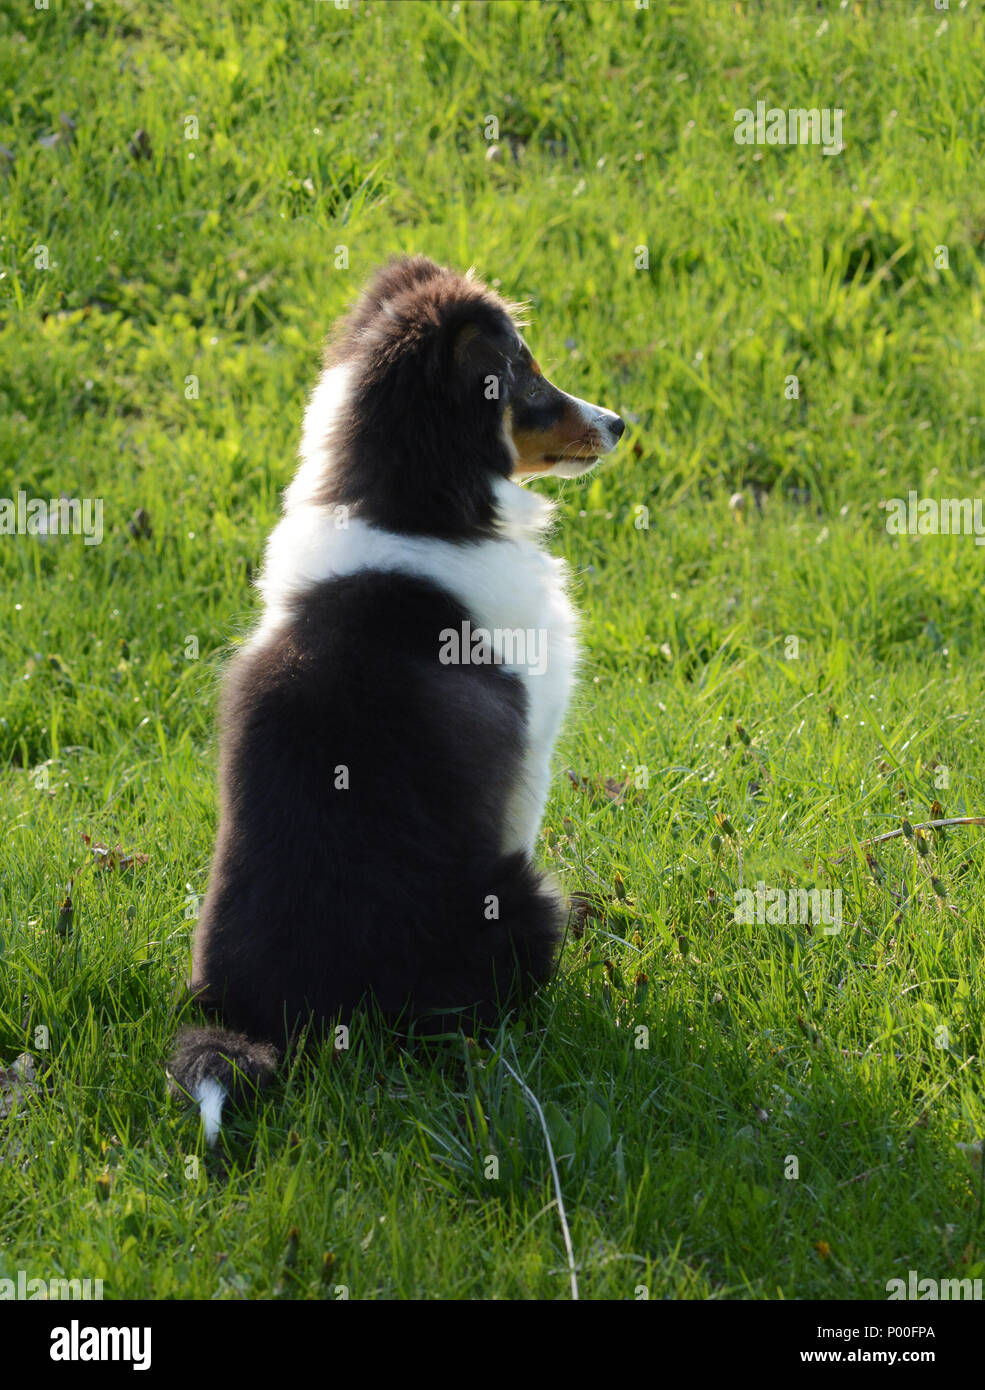 A young puppy Shetland Sheepdog (Sheltie) sits in grass in the sunshine Stock Photo